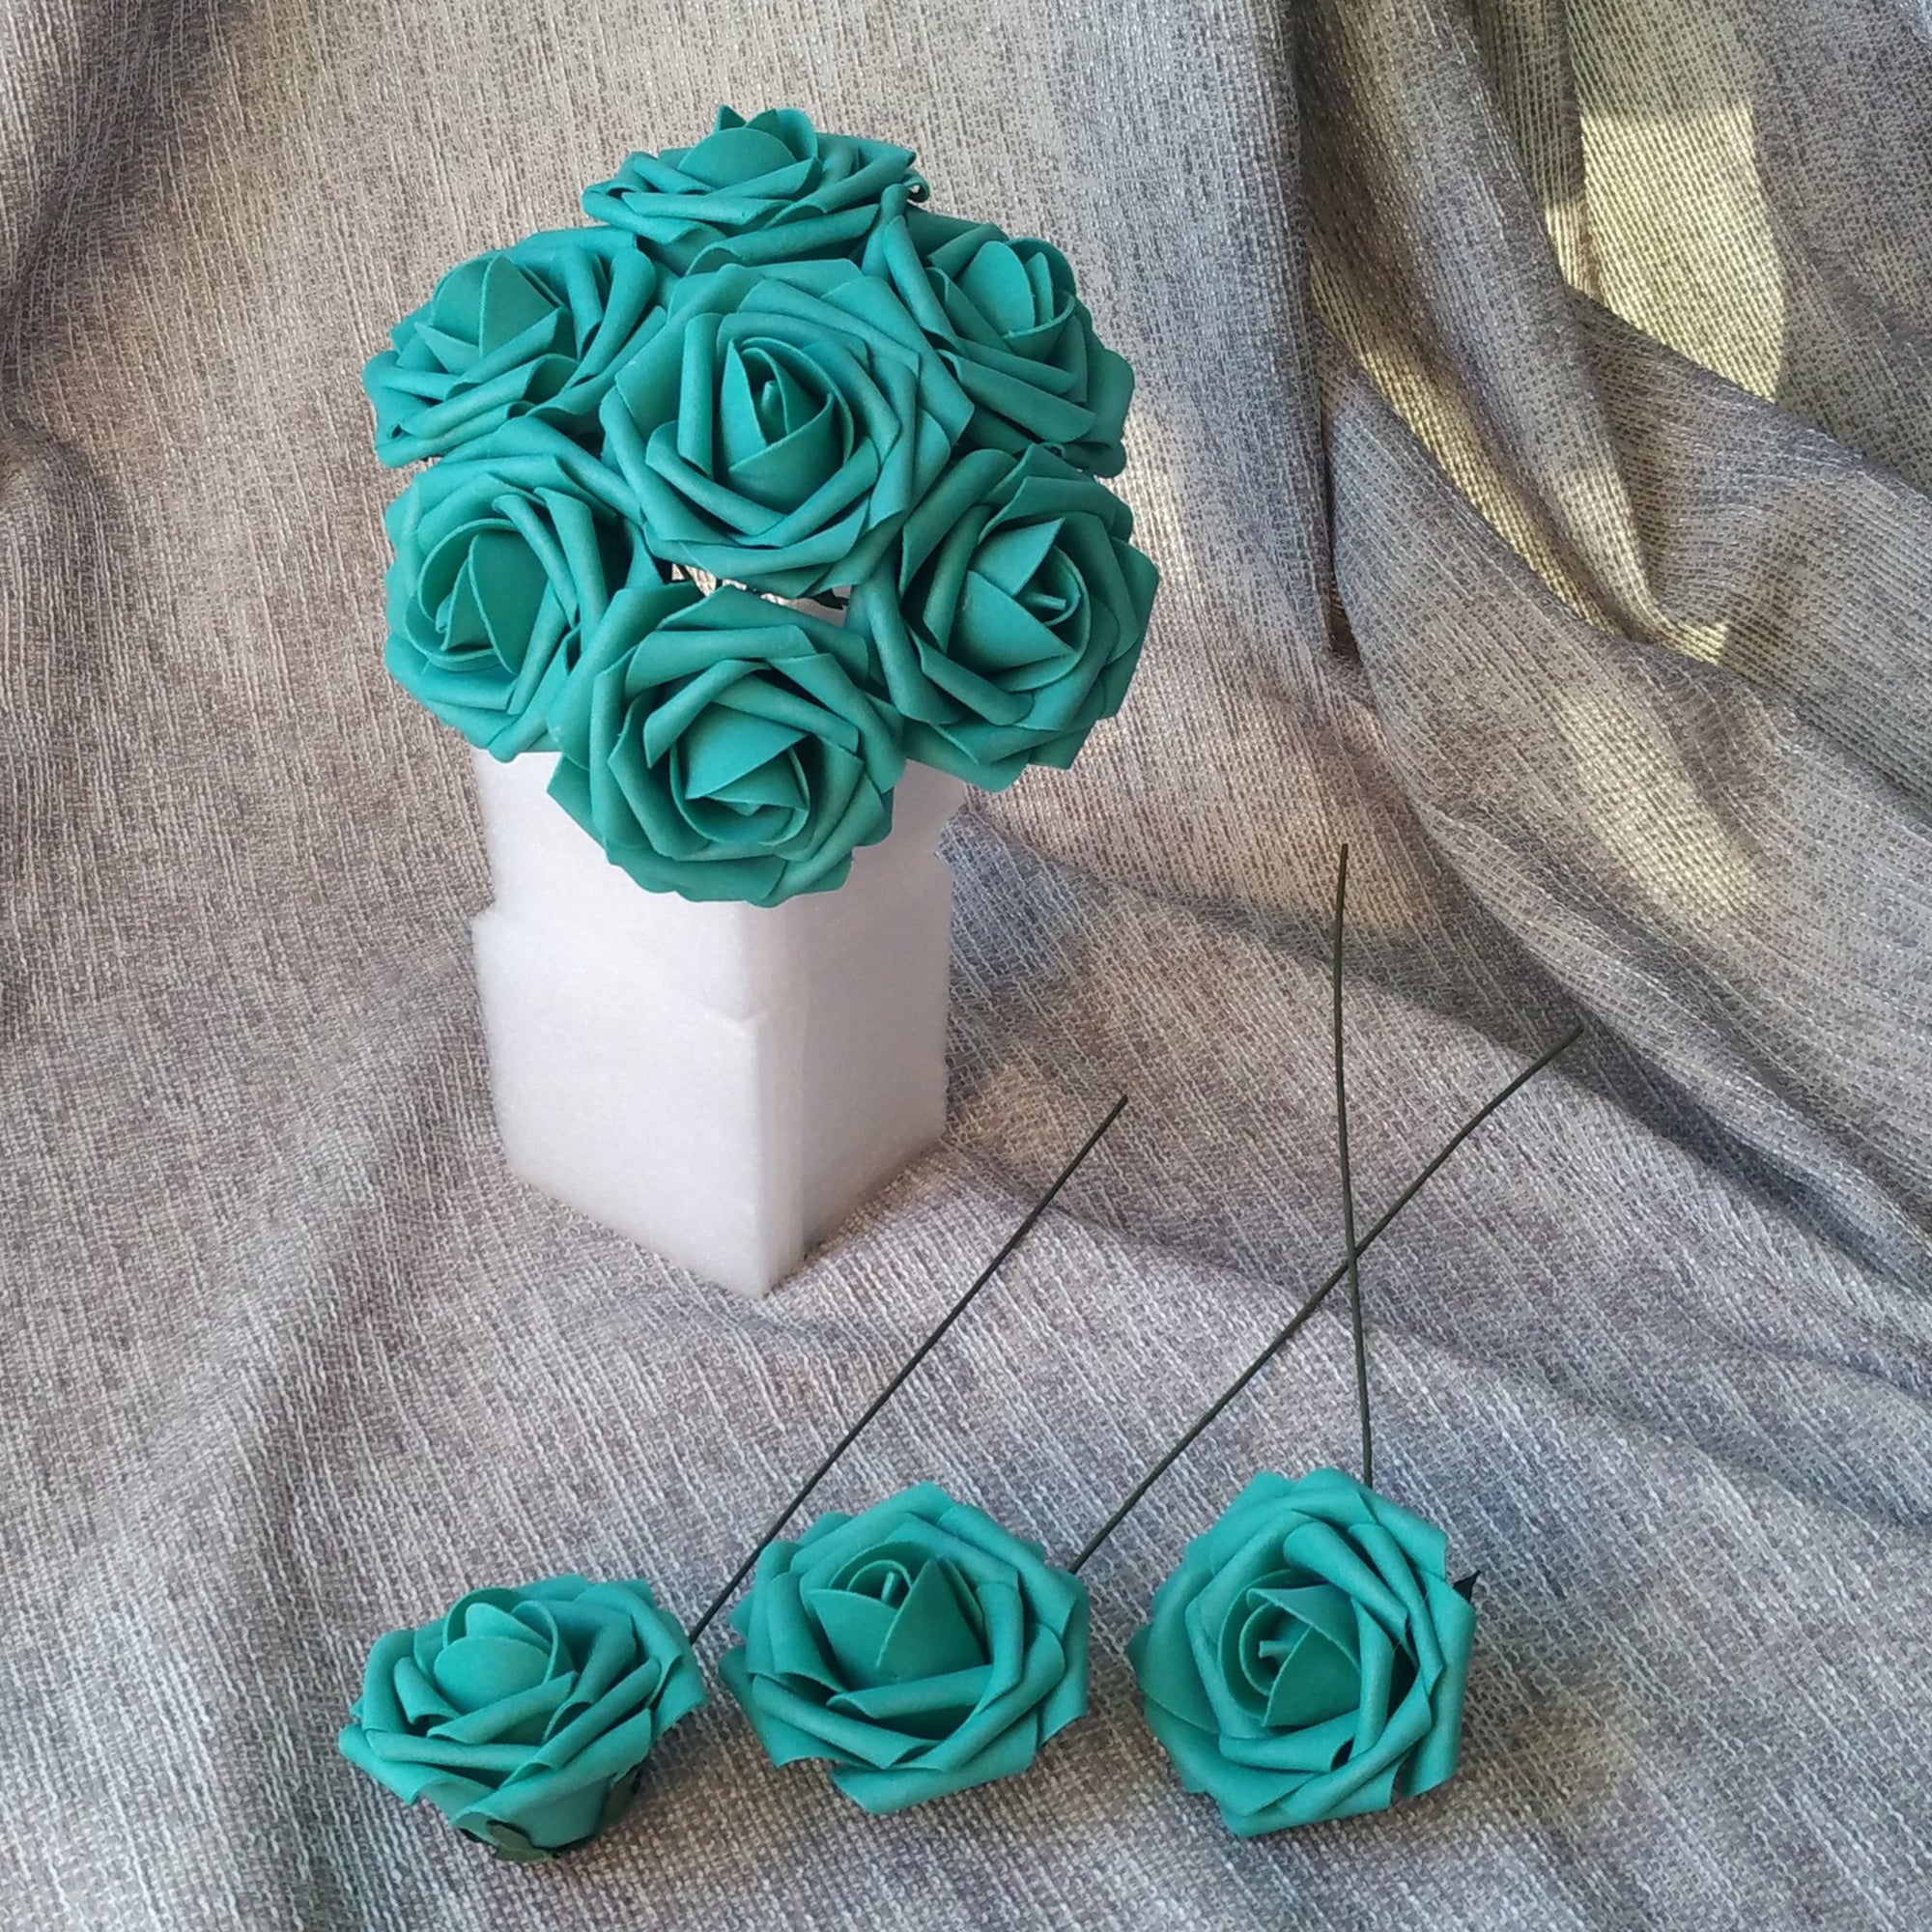 Teal Wedding Flowers Artificial Roses Turquoise Flowers Roses